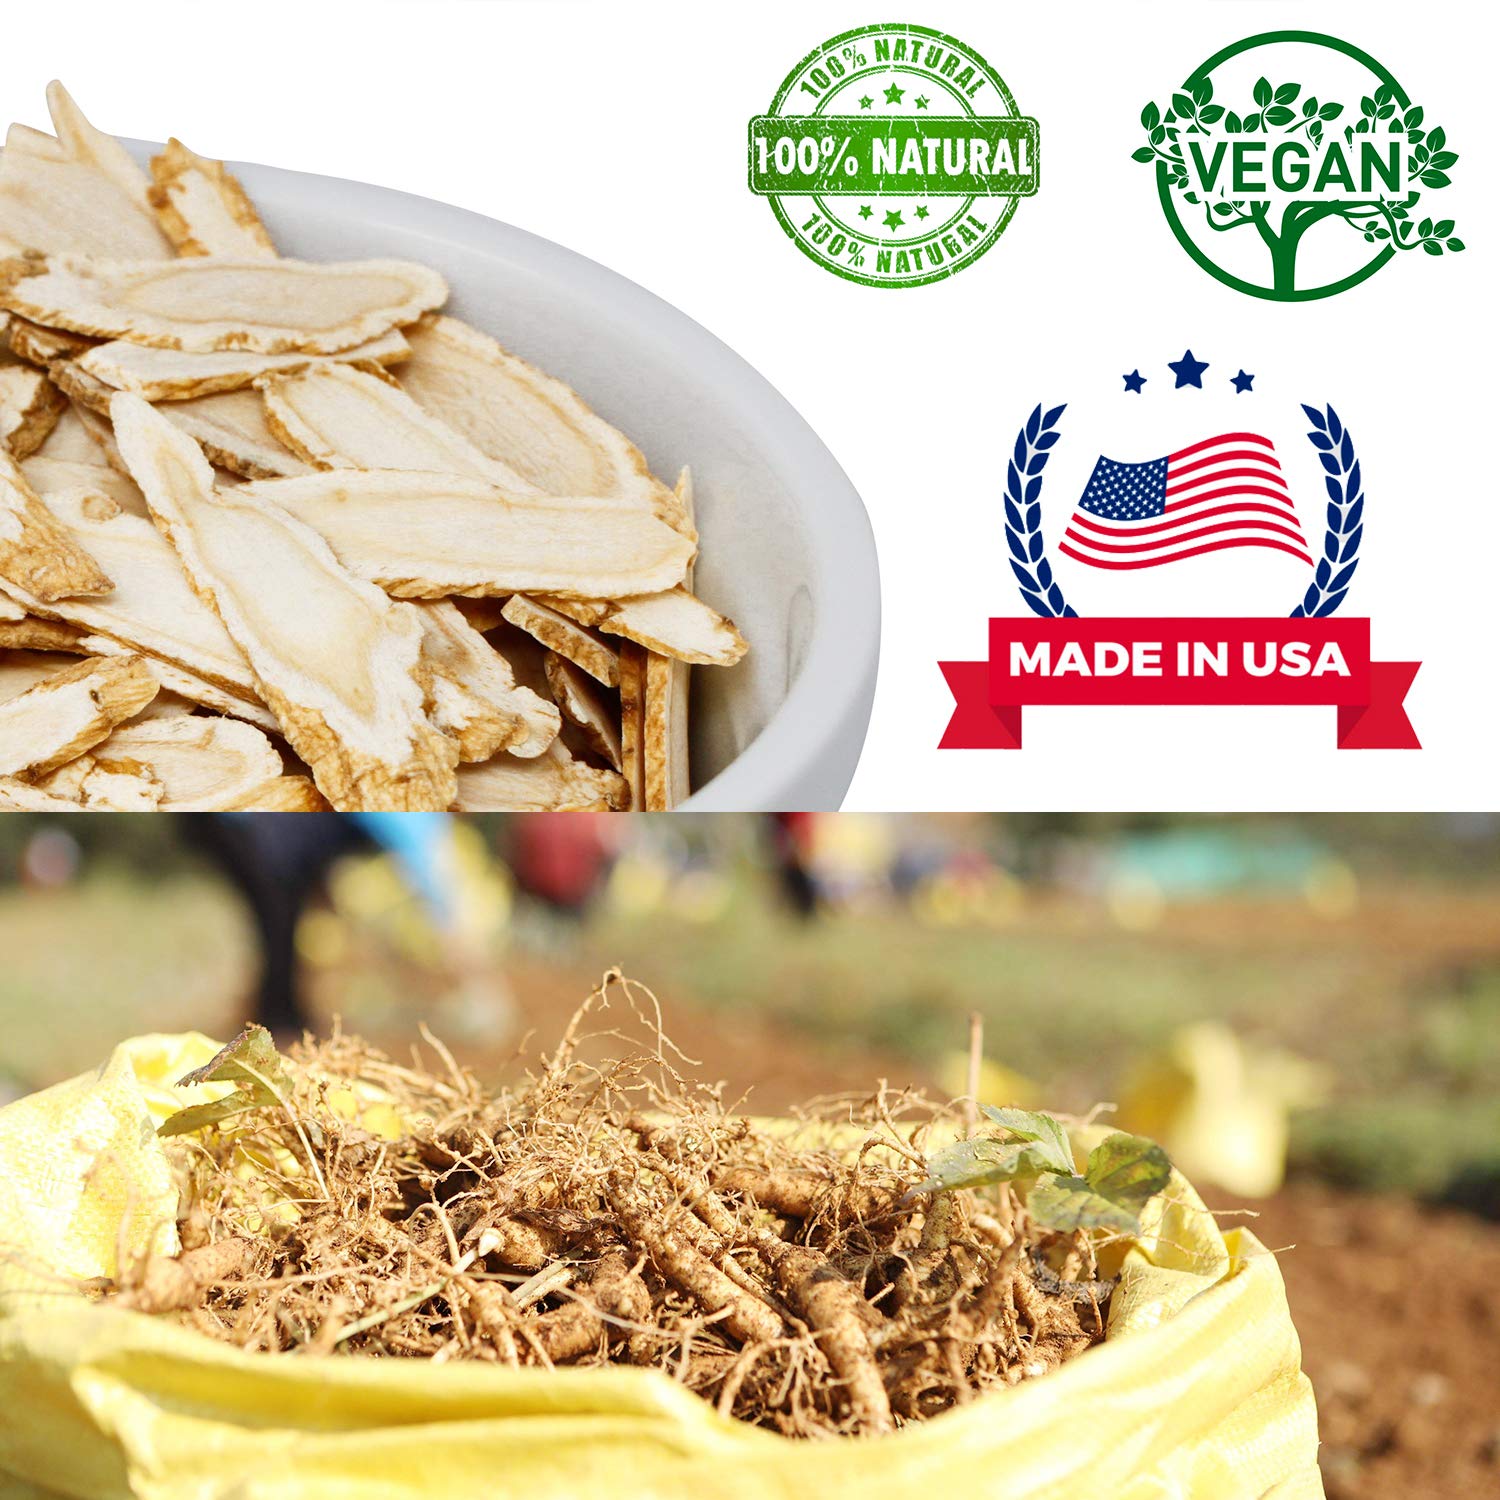 DABC OAK LAND American Ginseng Slices from Wisconsin (Sliced Ginseng Root Wisconsin Grown!Most People Use It to Make Ginseng Tea! Good for Health! 花旗参片/西洋参片 （Sliced Ginseng Root） 113g/Bag